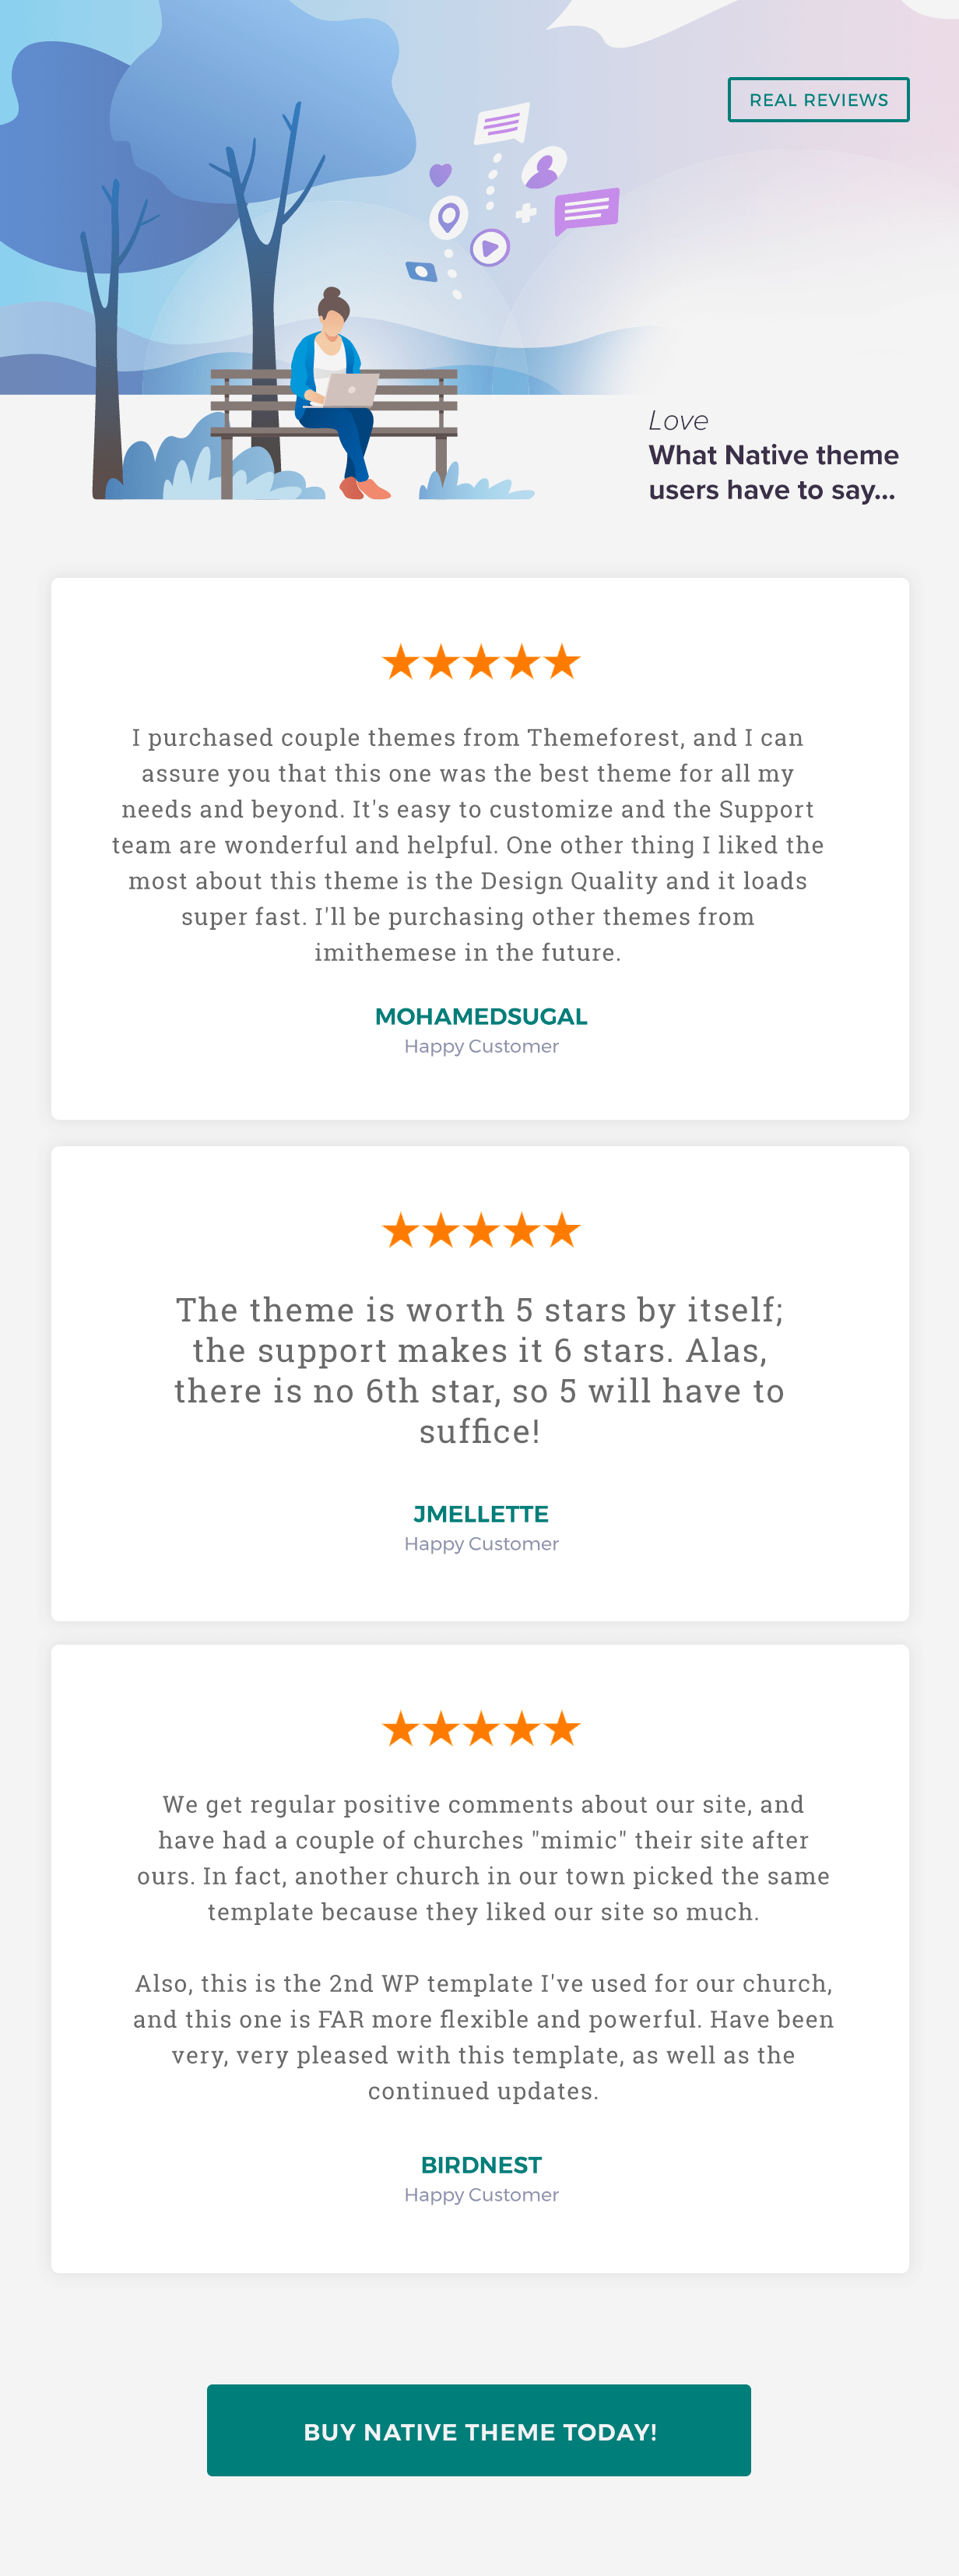 Page of 3 different real reviews on a gray background.